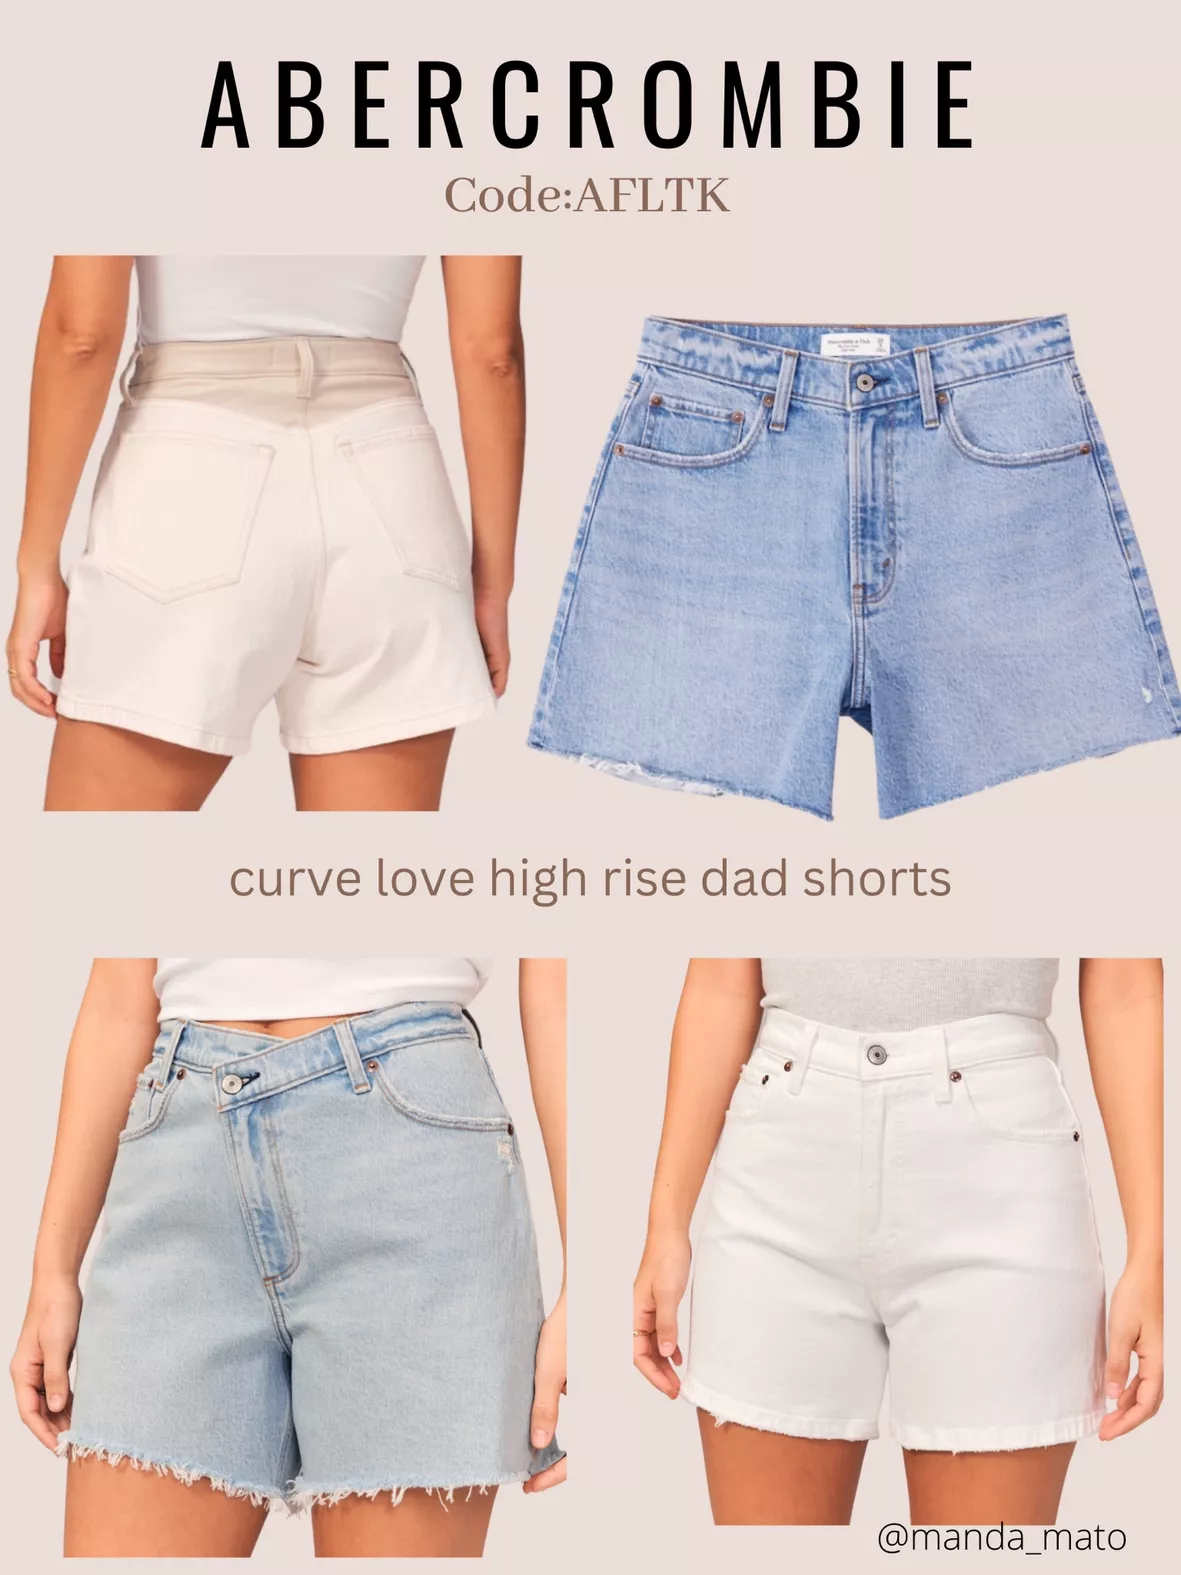 Abercrombie and Fitch + Curve Love High Rise Dad Jeans